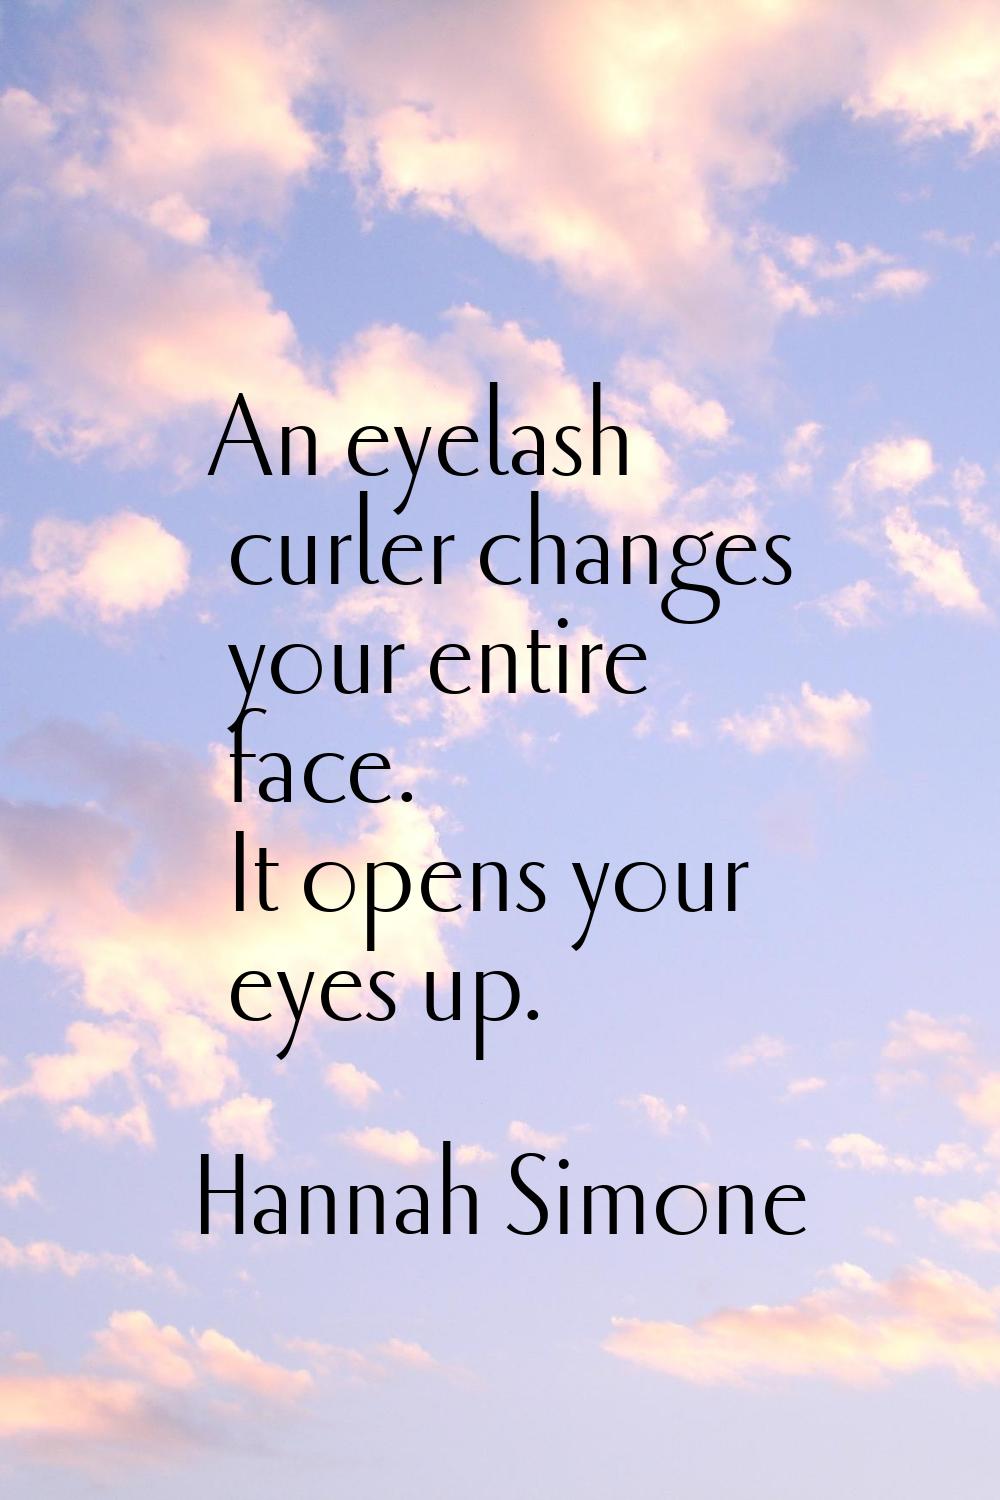 An eyelash curler changes your entire face. It opens your eyes up.